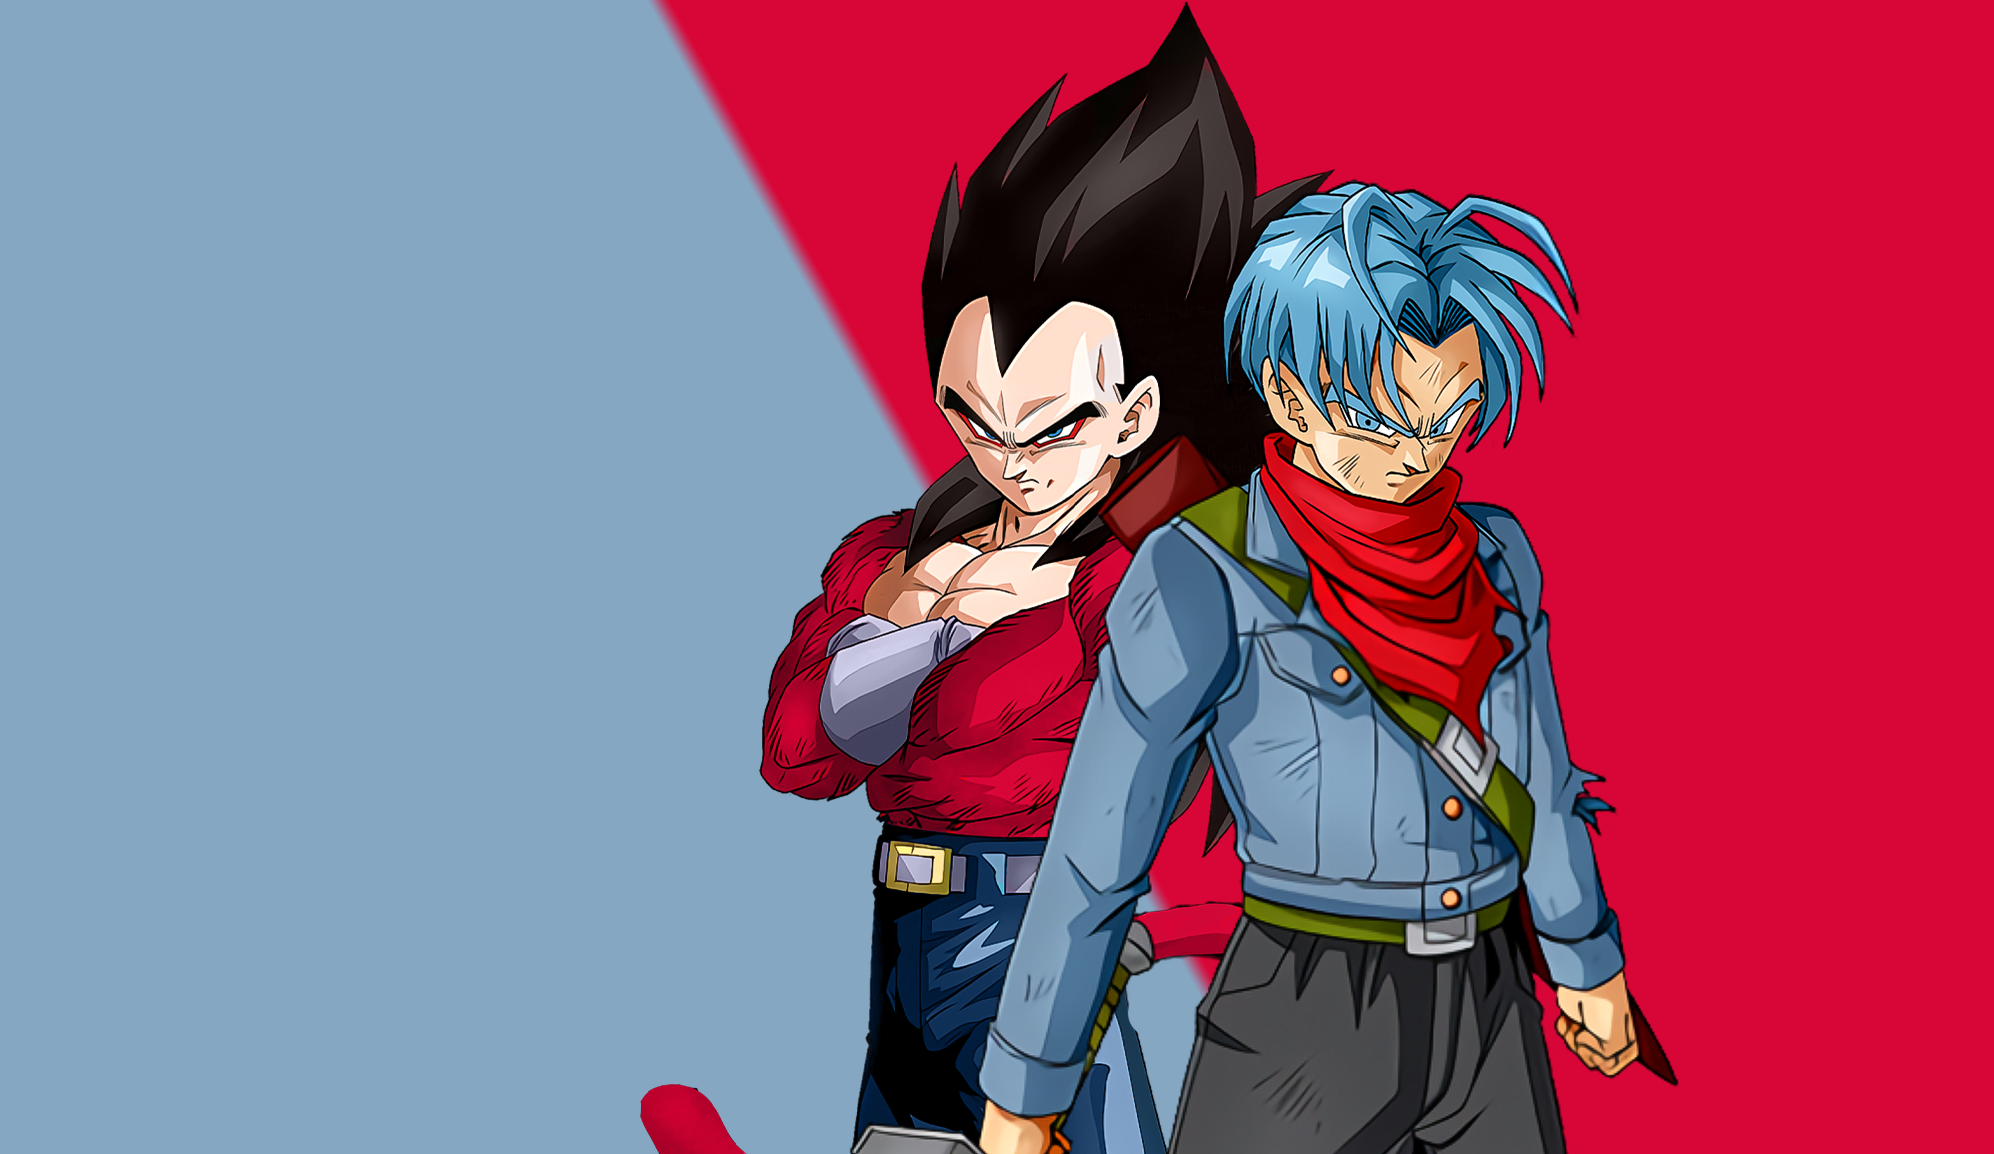 With the Vegeta Wallpapers released last month by the official DB twitter,  I made one in a similar style for Future Trunks : r/dbz